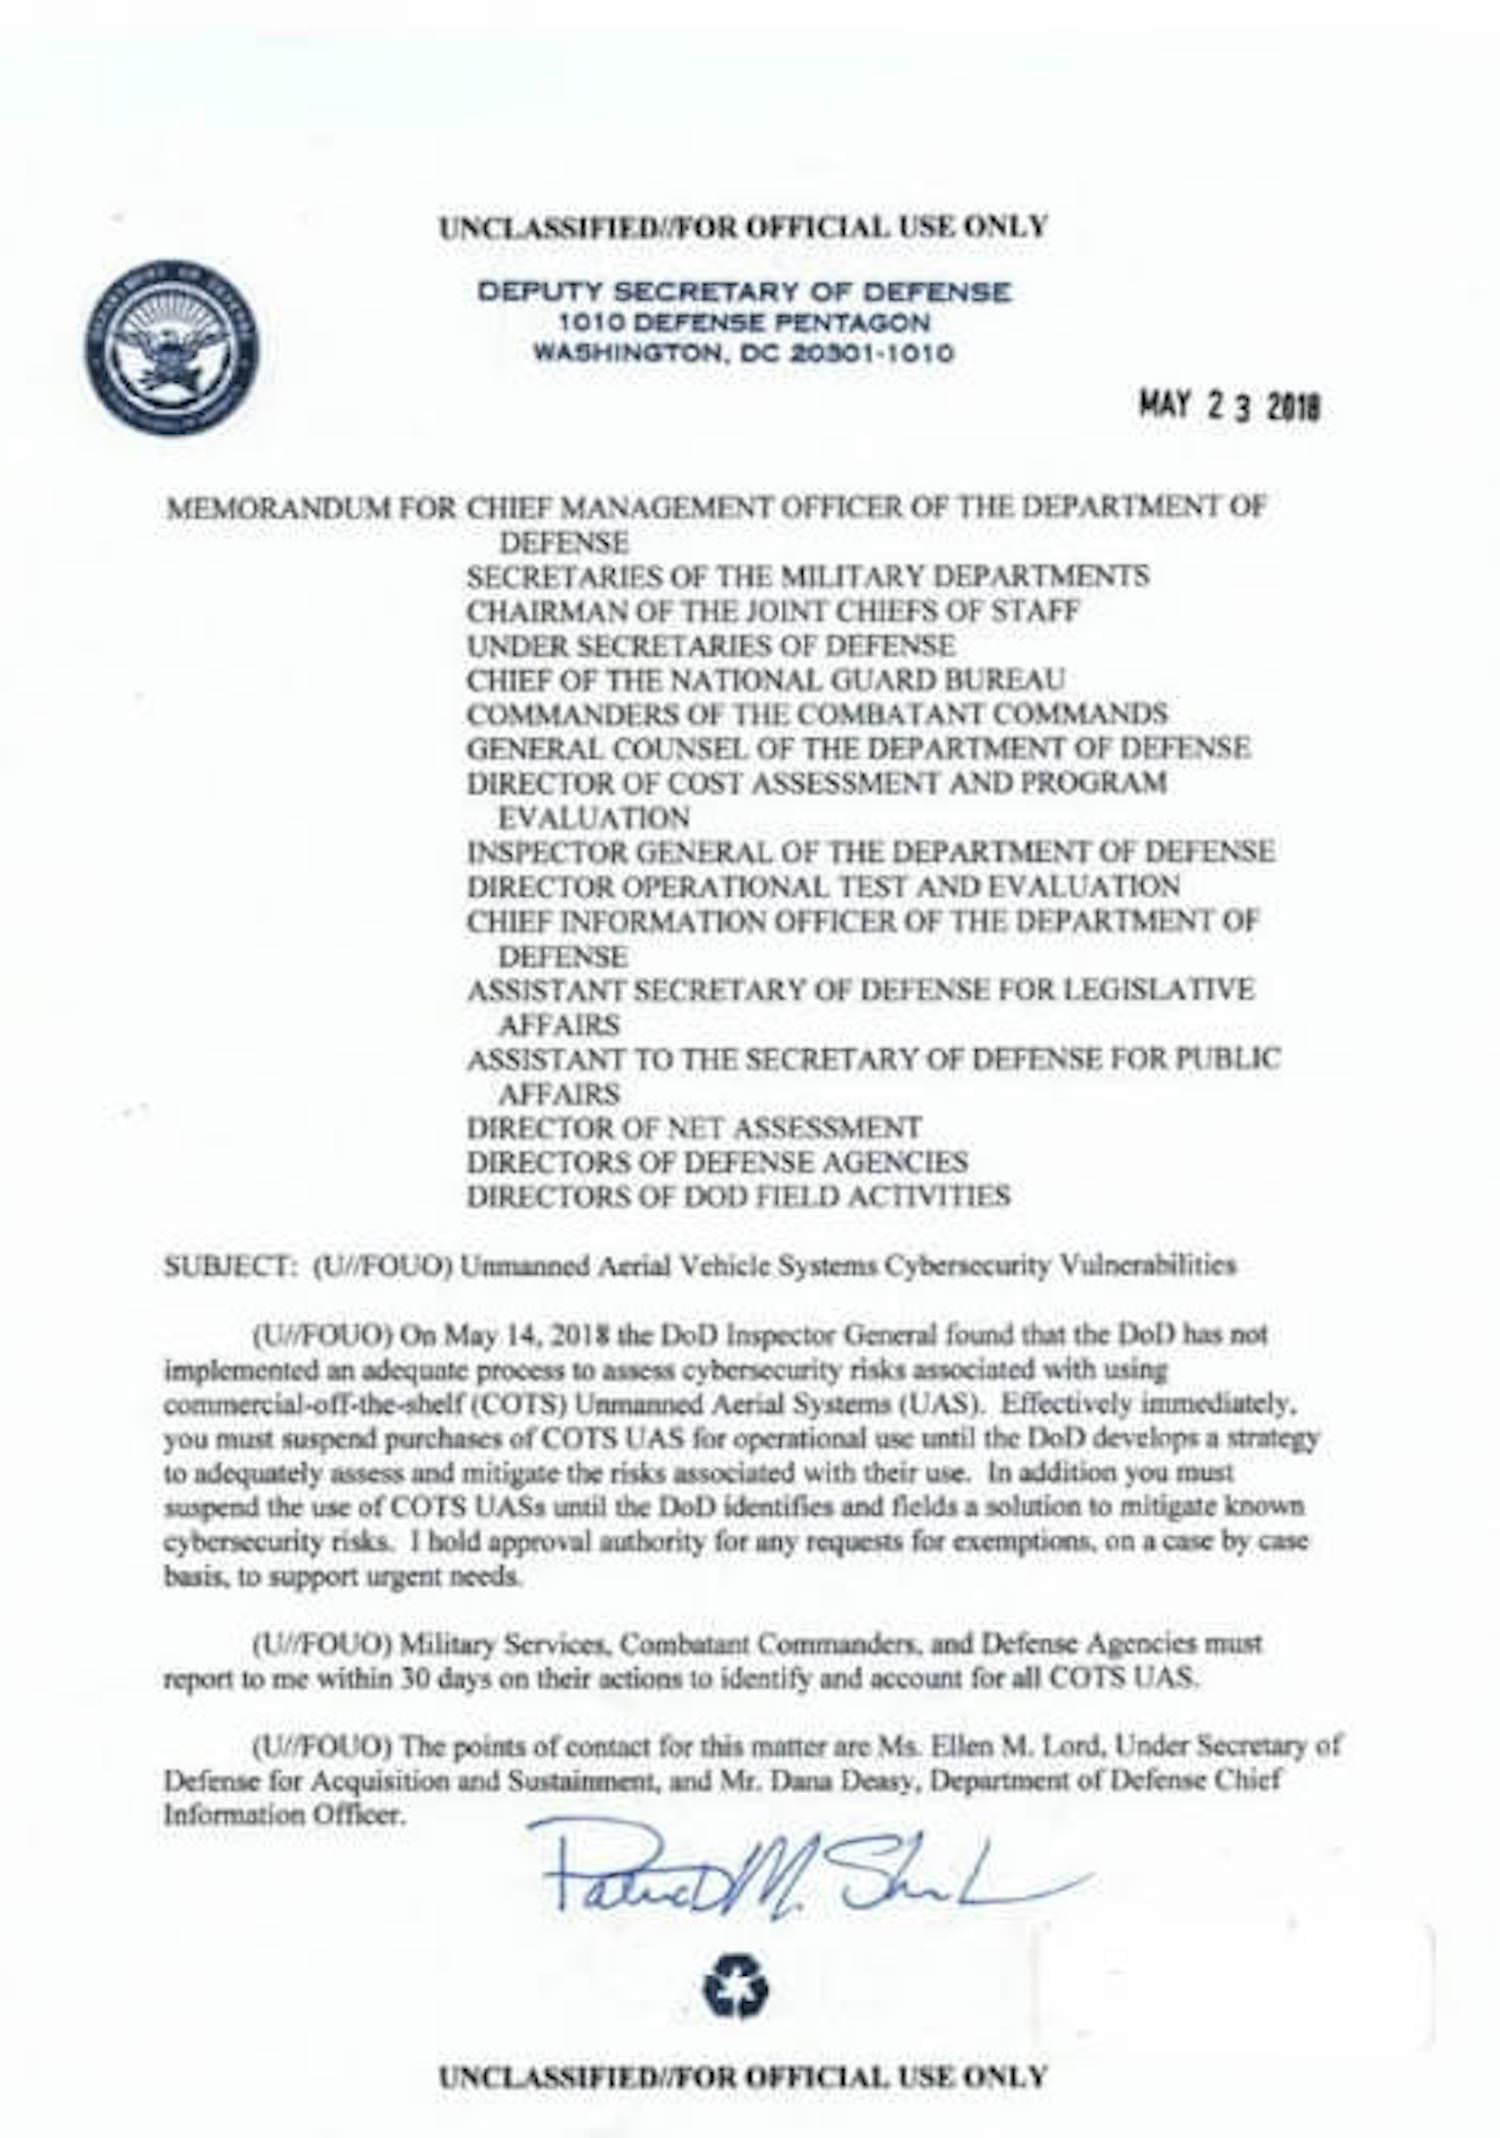 Department of Defense bans the purchase of commercial-over-the-shelf UAS, including DJI drones effective immediately